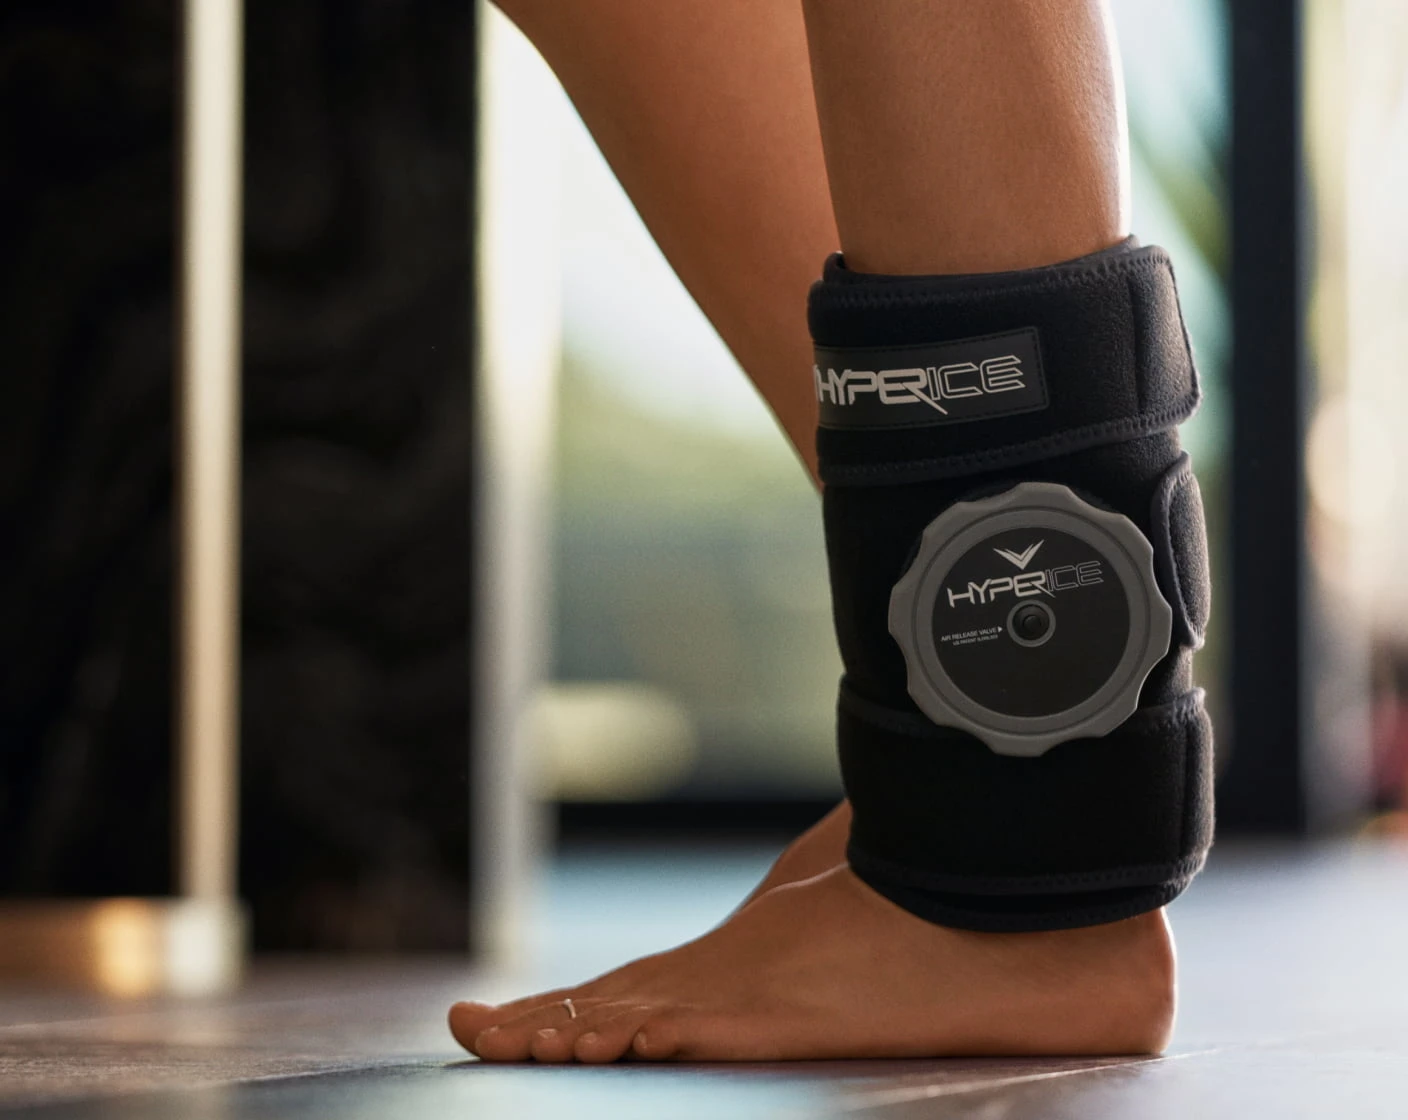 Hyperice Knee Compression Sleeve